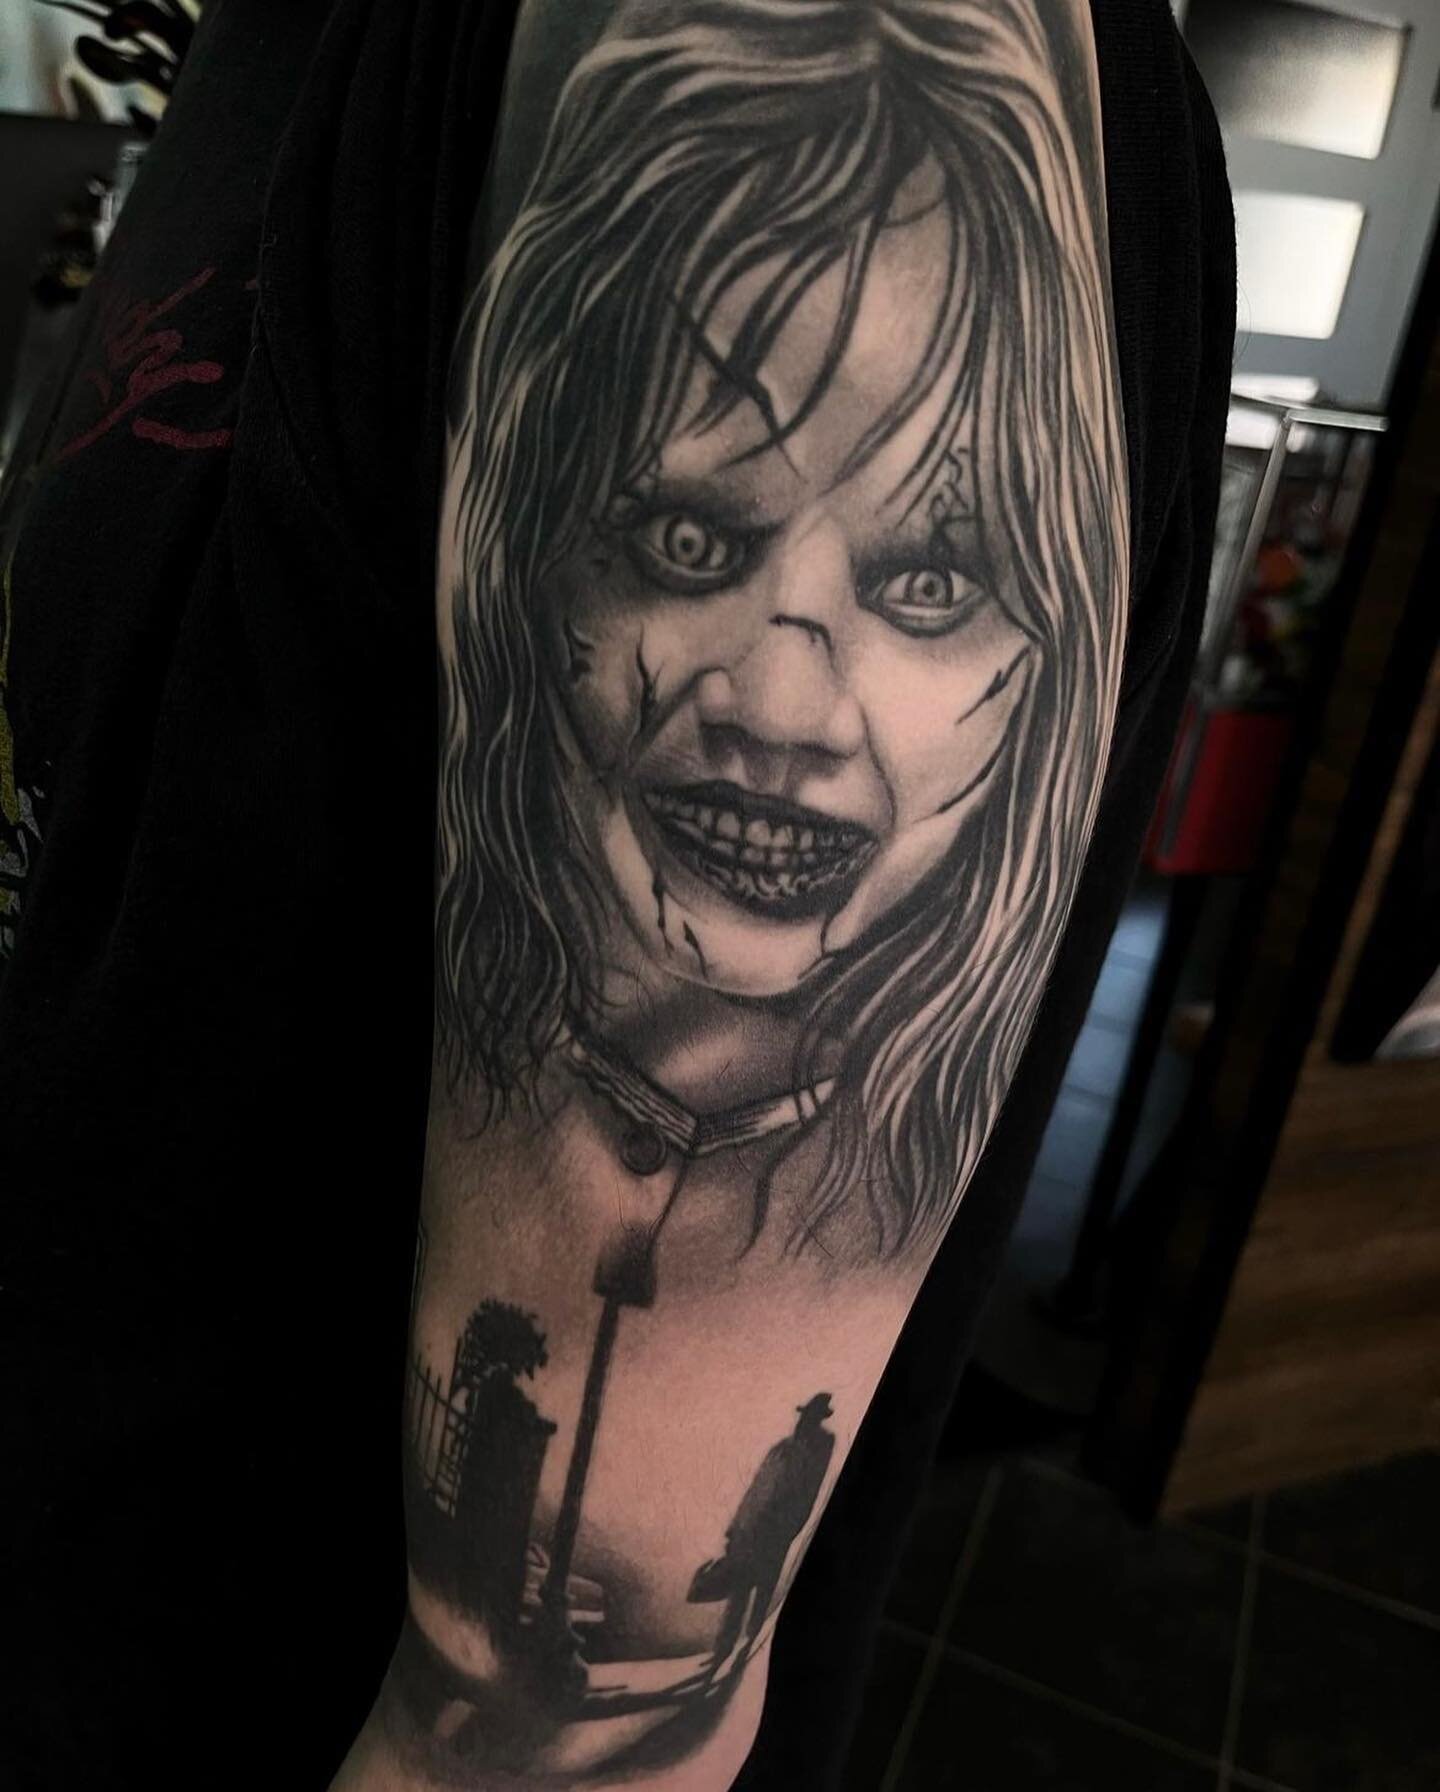 Love this horror theme sleeve by Carlos! 🤩